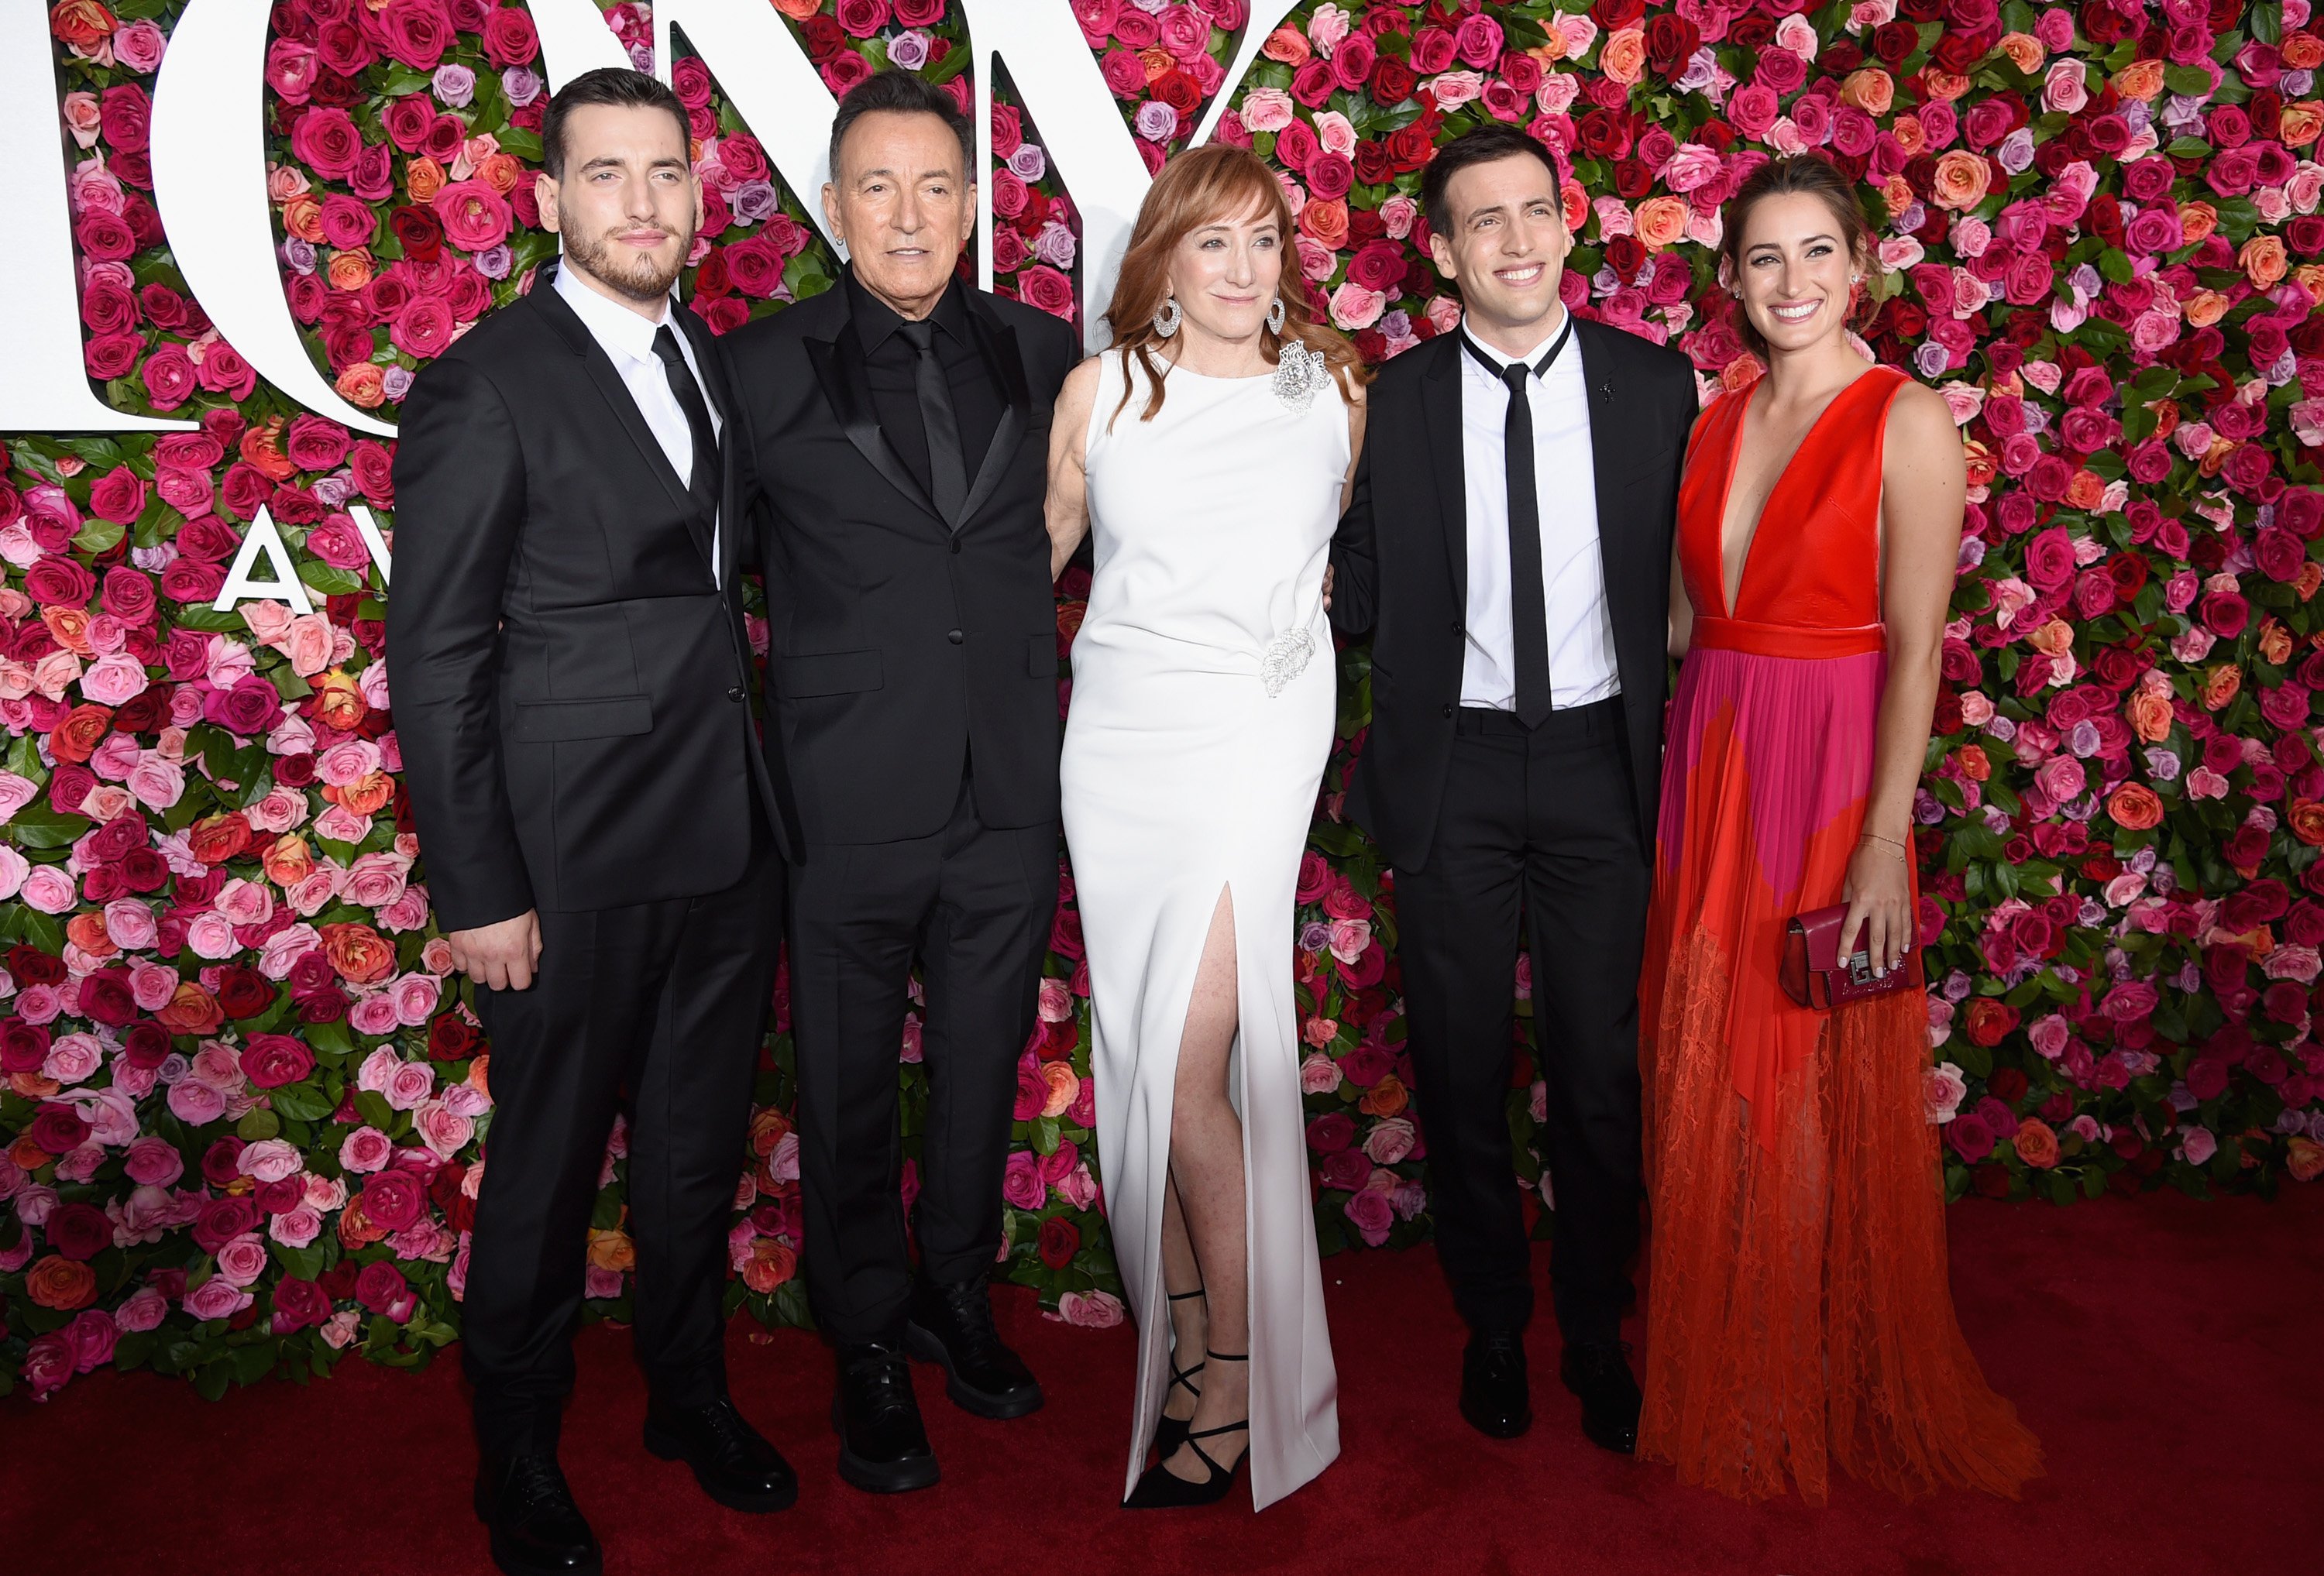 Evan Springsteen, Bruce Springsteen, Patti Scialfa, Sam Springsteen and Jessica Springsteen attending the 72nd Annual Tony Awards at Radio City Music Hall on June 10, 2018 in New York City. | Source: Getty Images